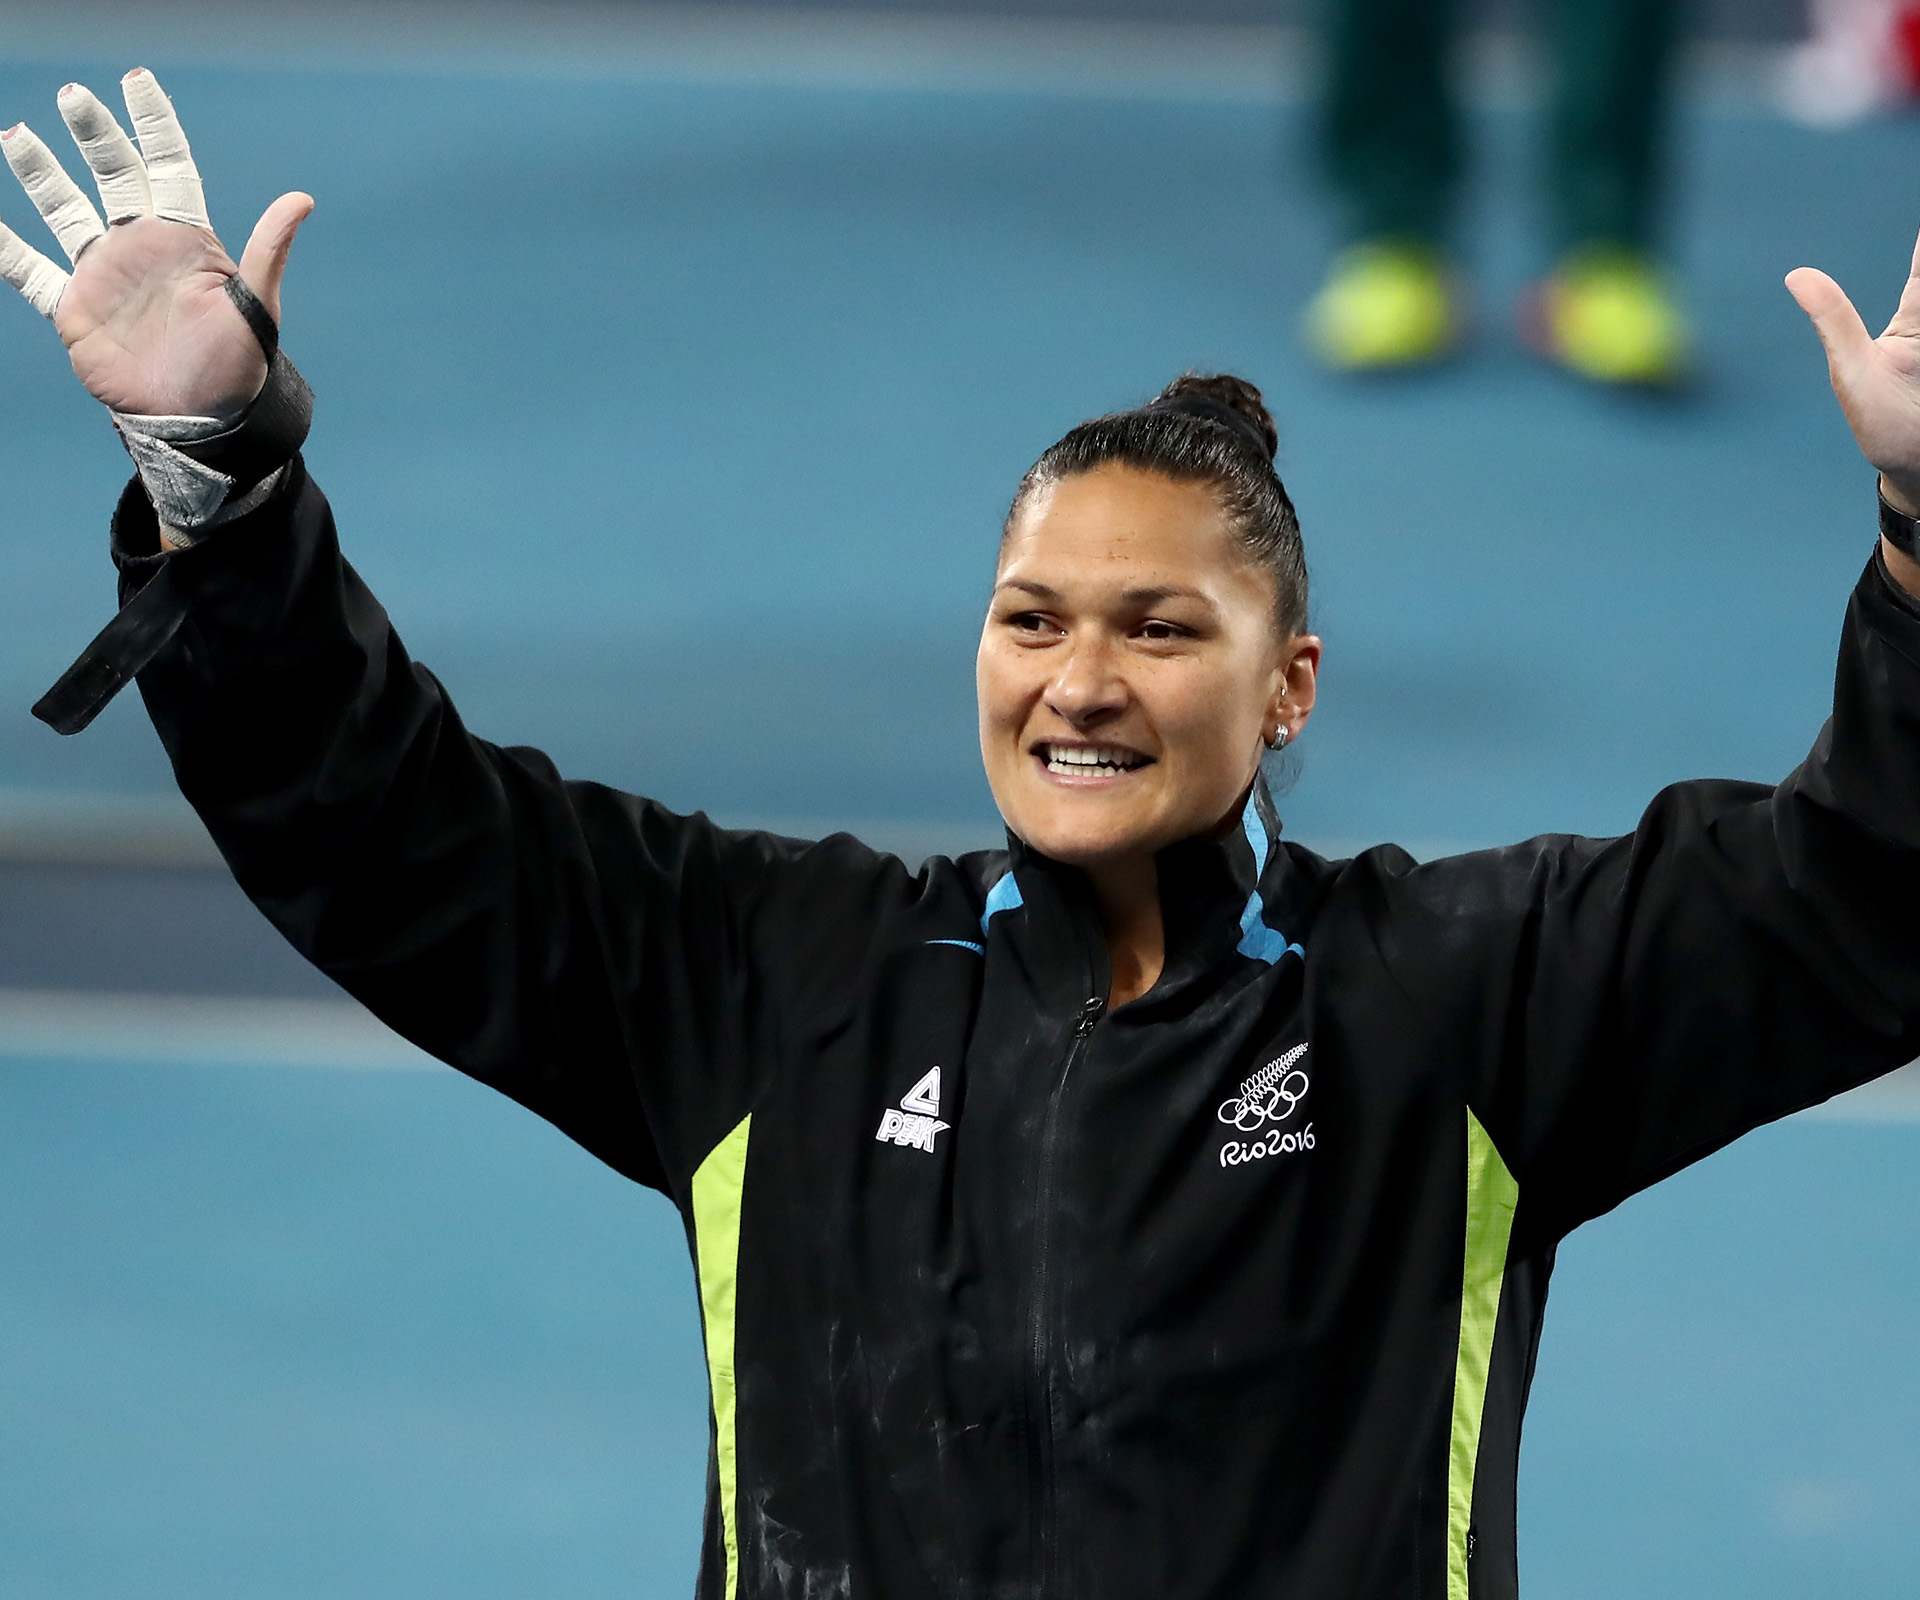 Valerie Adams takes out silver at the Rio Olympics